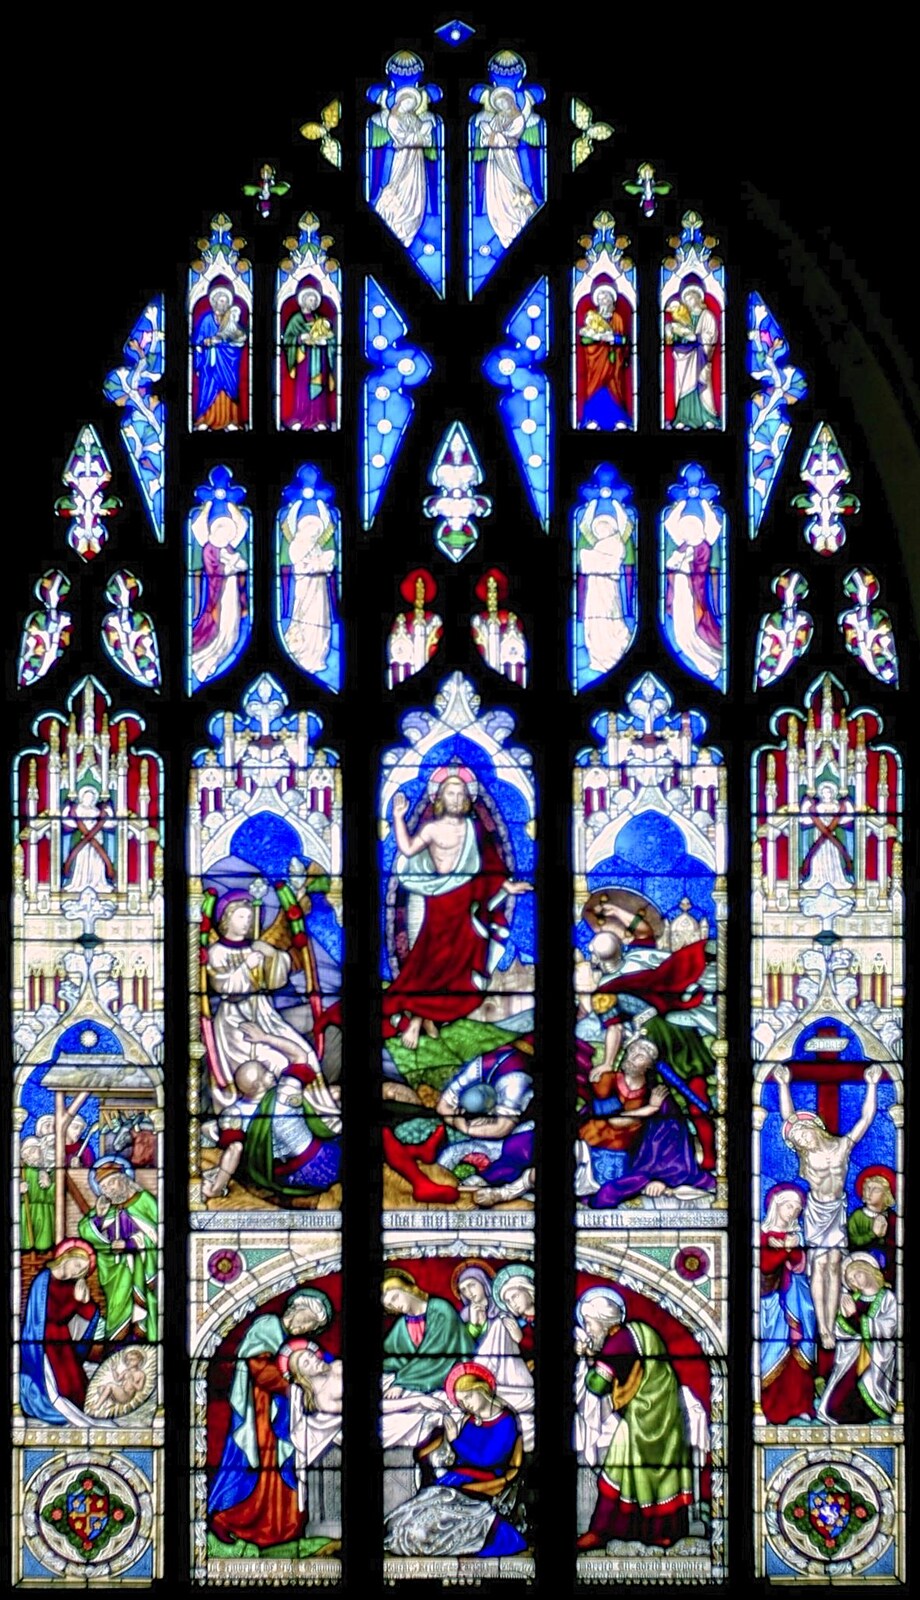 A stained glass window in St. Mary's from Christmas Lights and St. Mary's Church, Diss, Norfolk - 29th November 2004